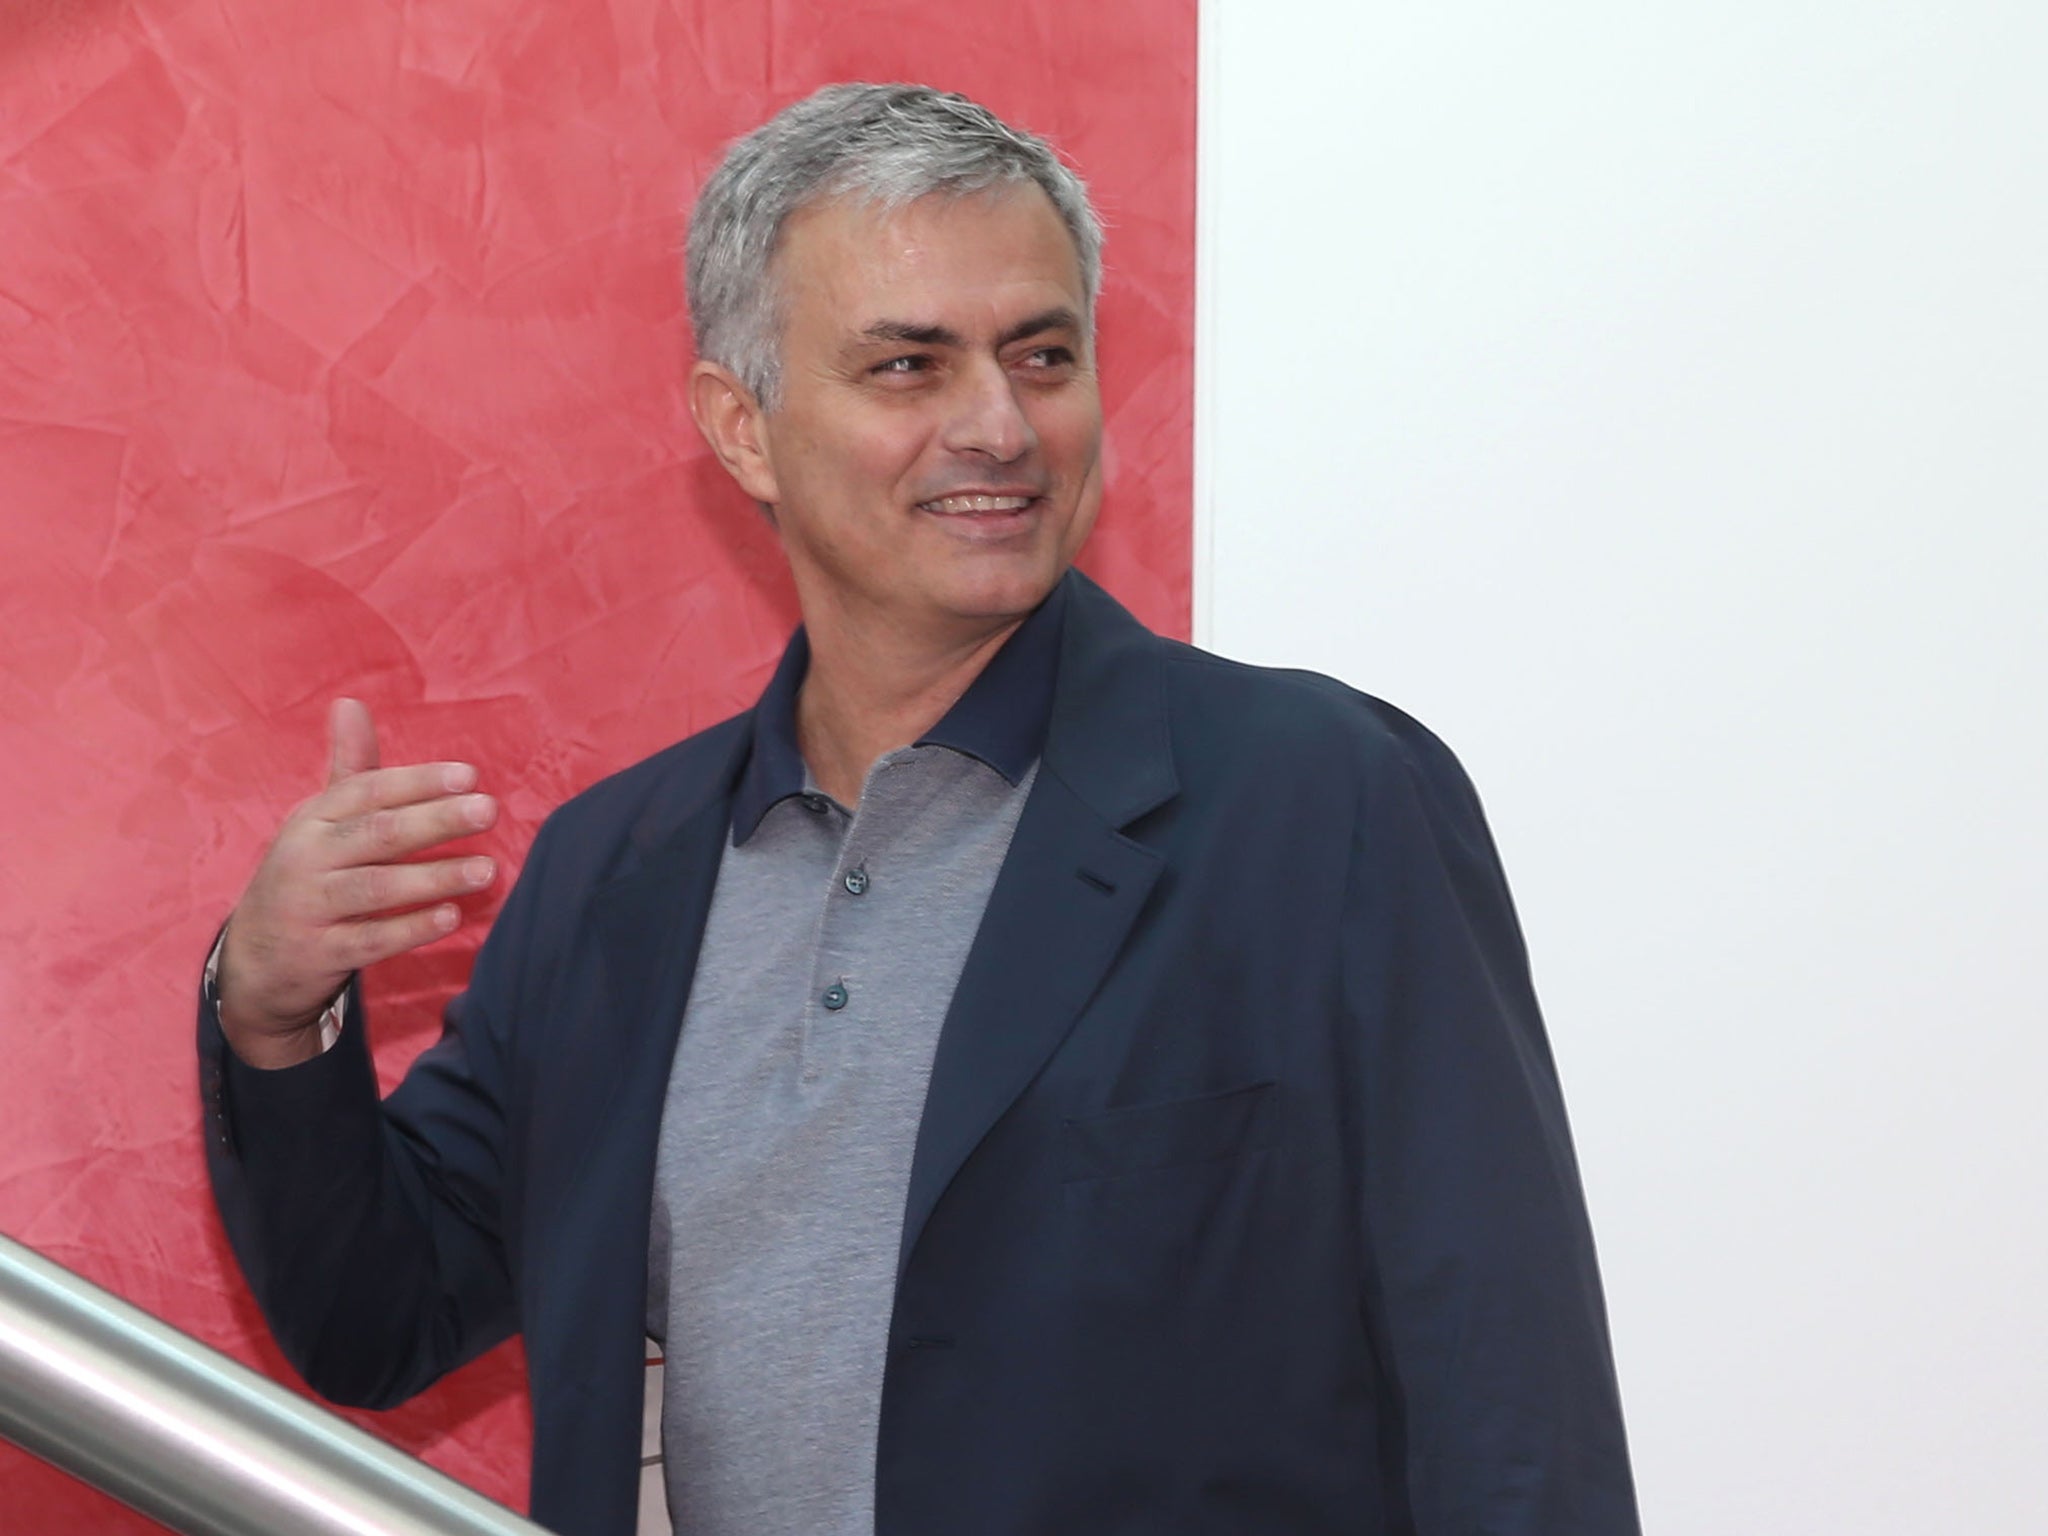 Mourinho was appointed on a three-year contract last week